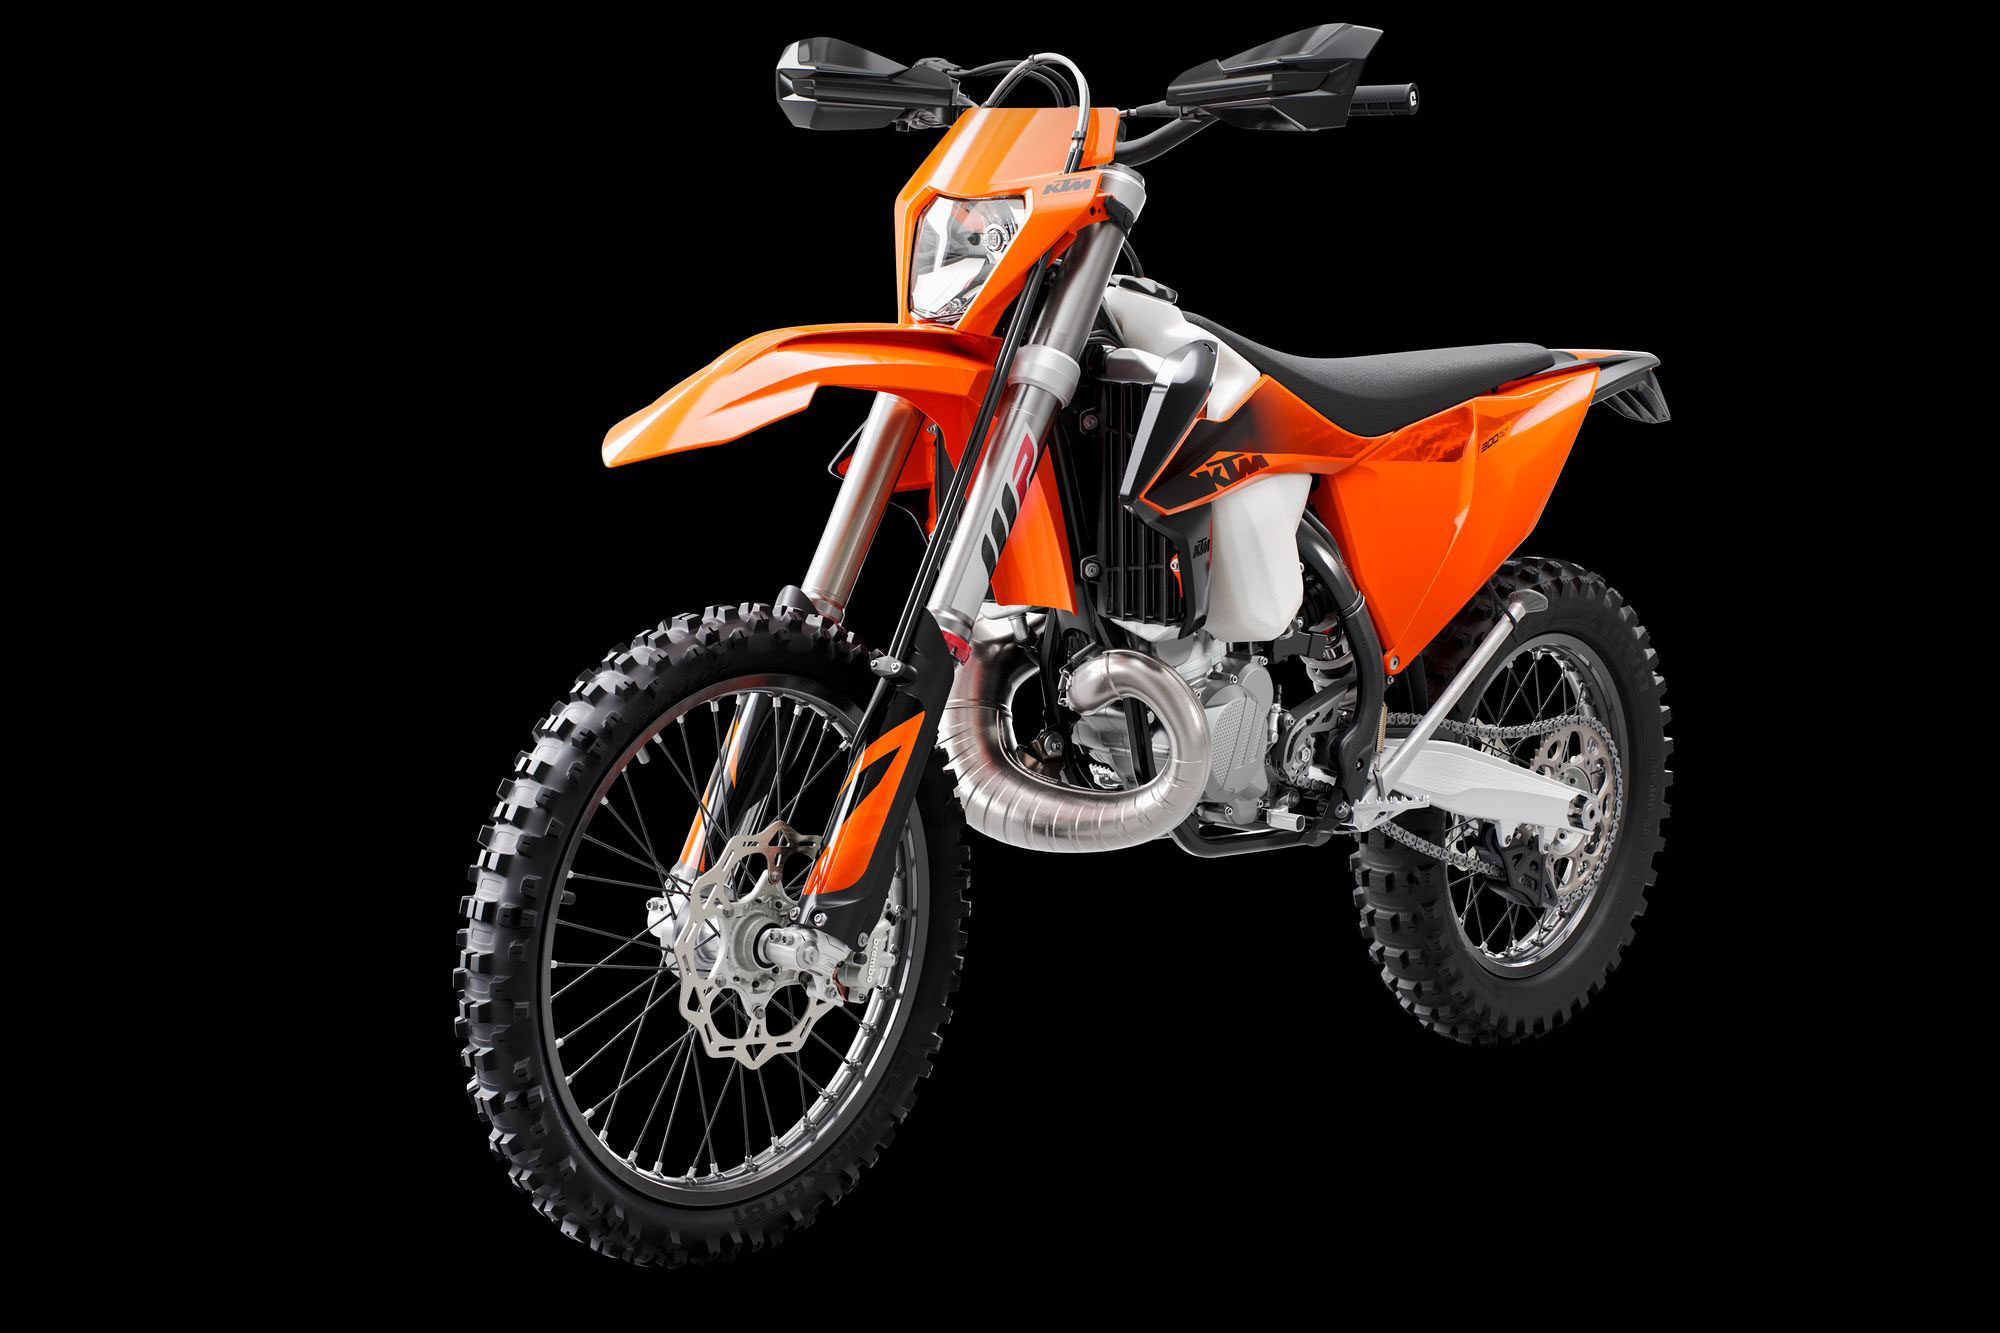 2021 Ktm 300 Xc-W Tpi Erzbergrodeo For Sale in Rapid City 